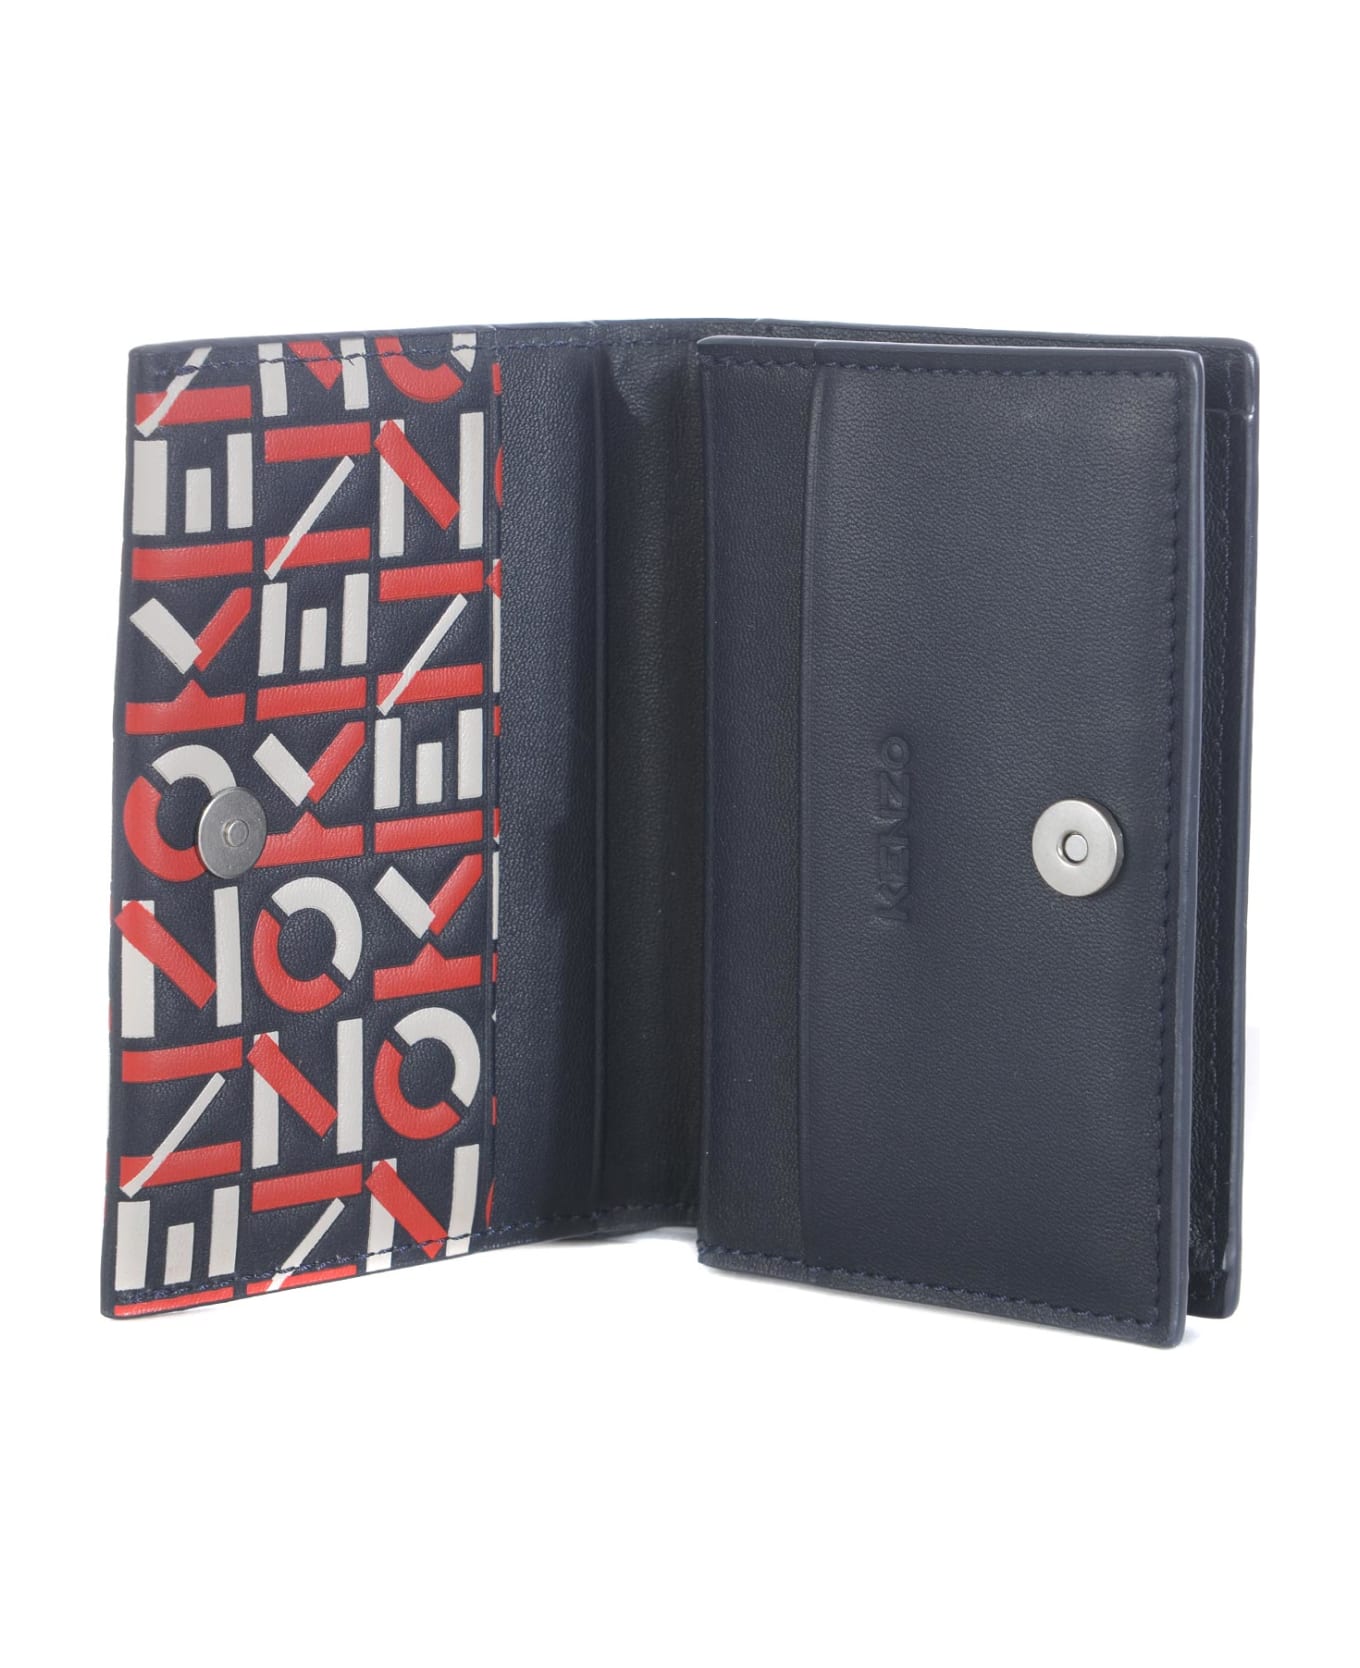 Kenzo Leather Card Holder - Blu/rosso